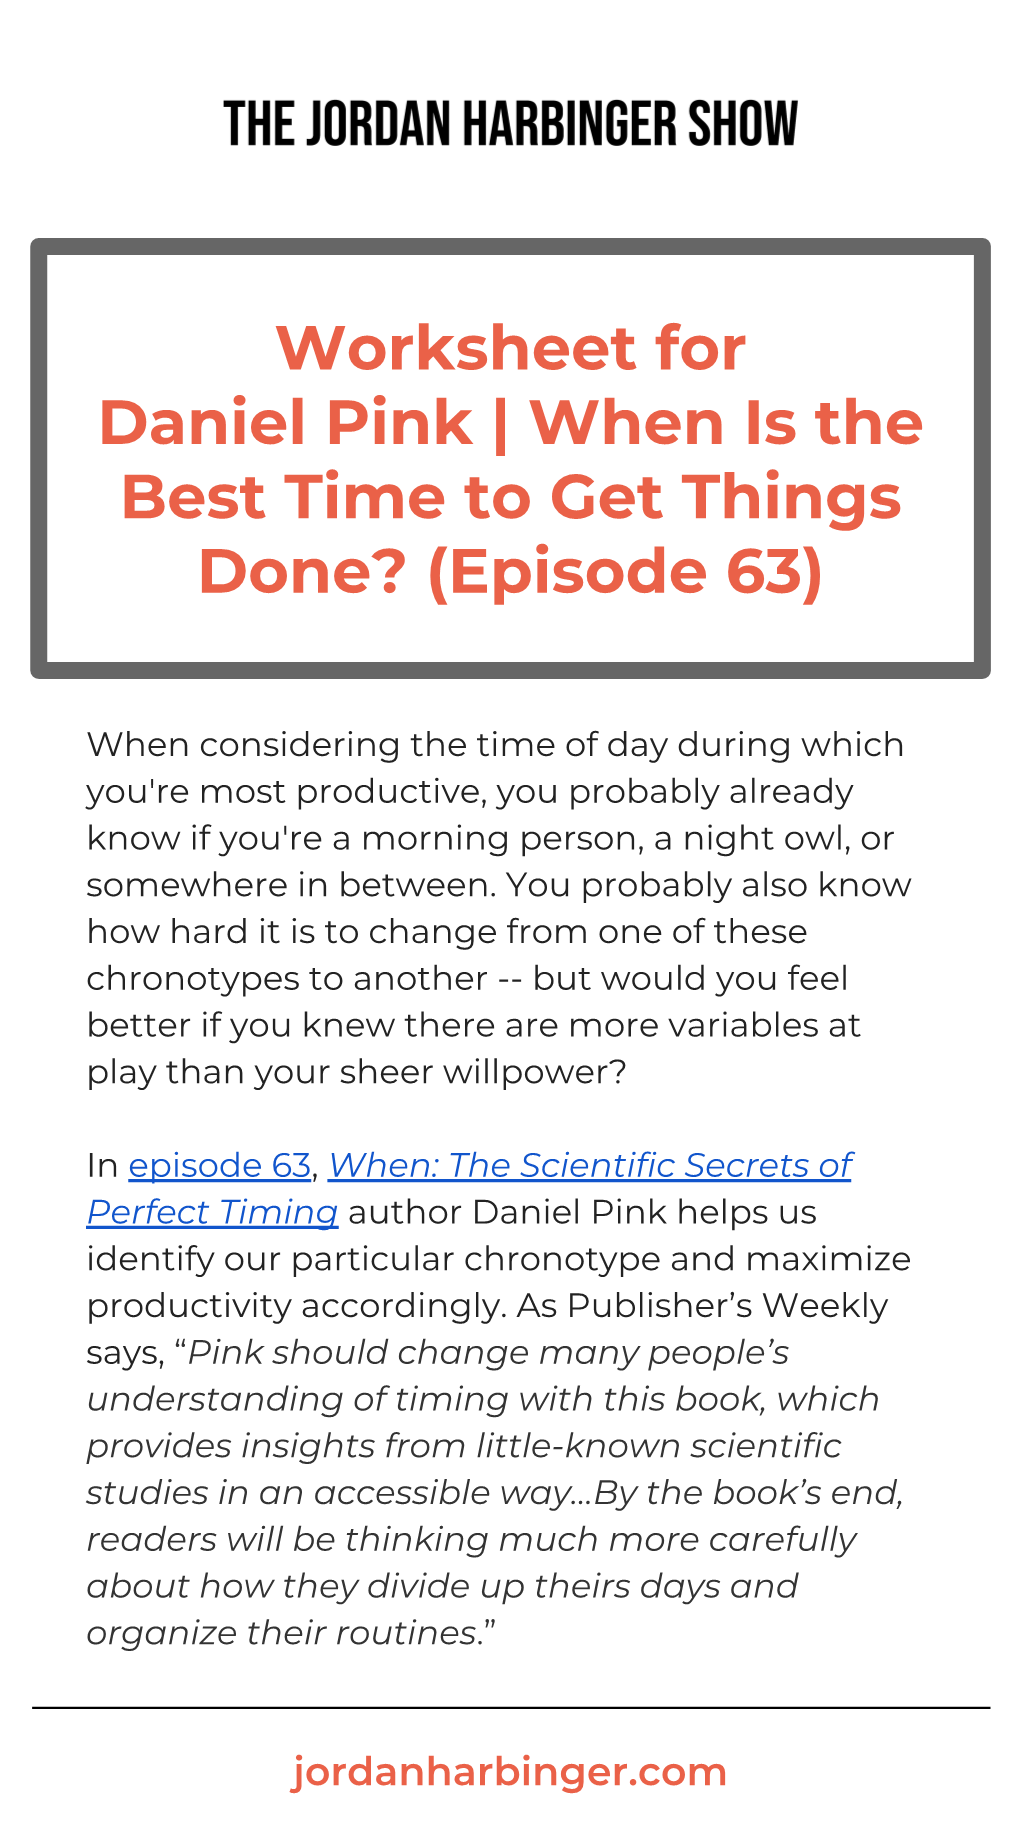 Worksheet for Daniel Pink | When Is the Best Time to Get Things Done? (Episode 63)